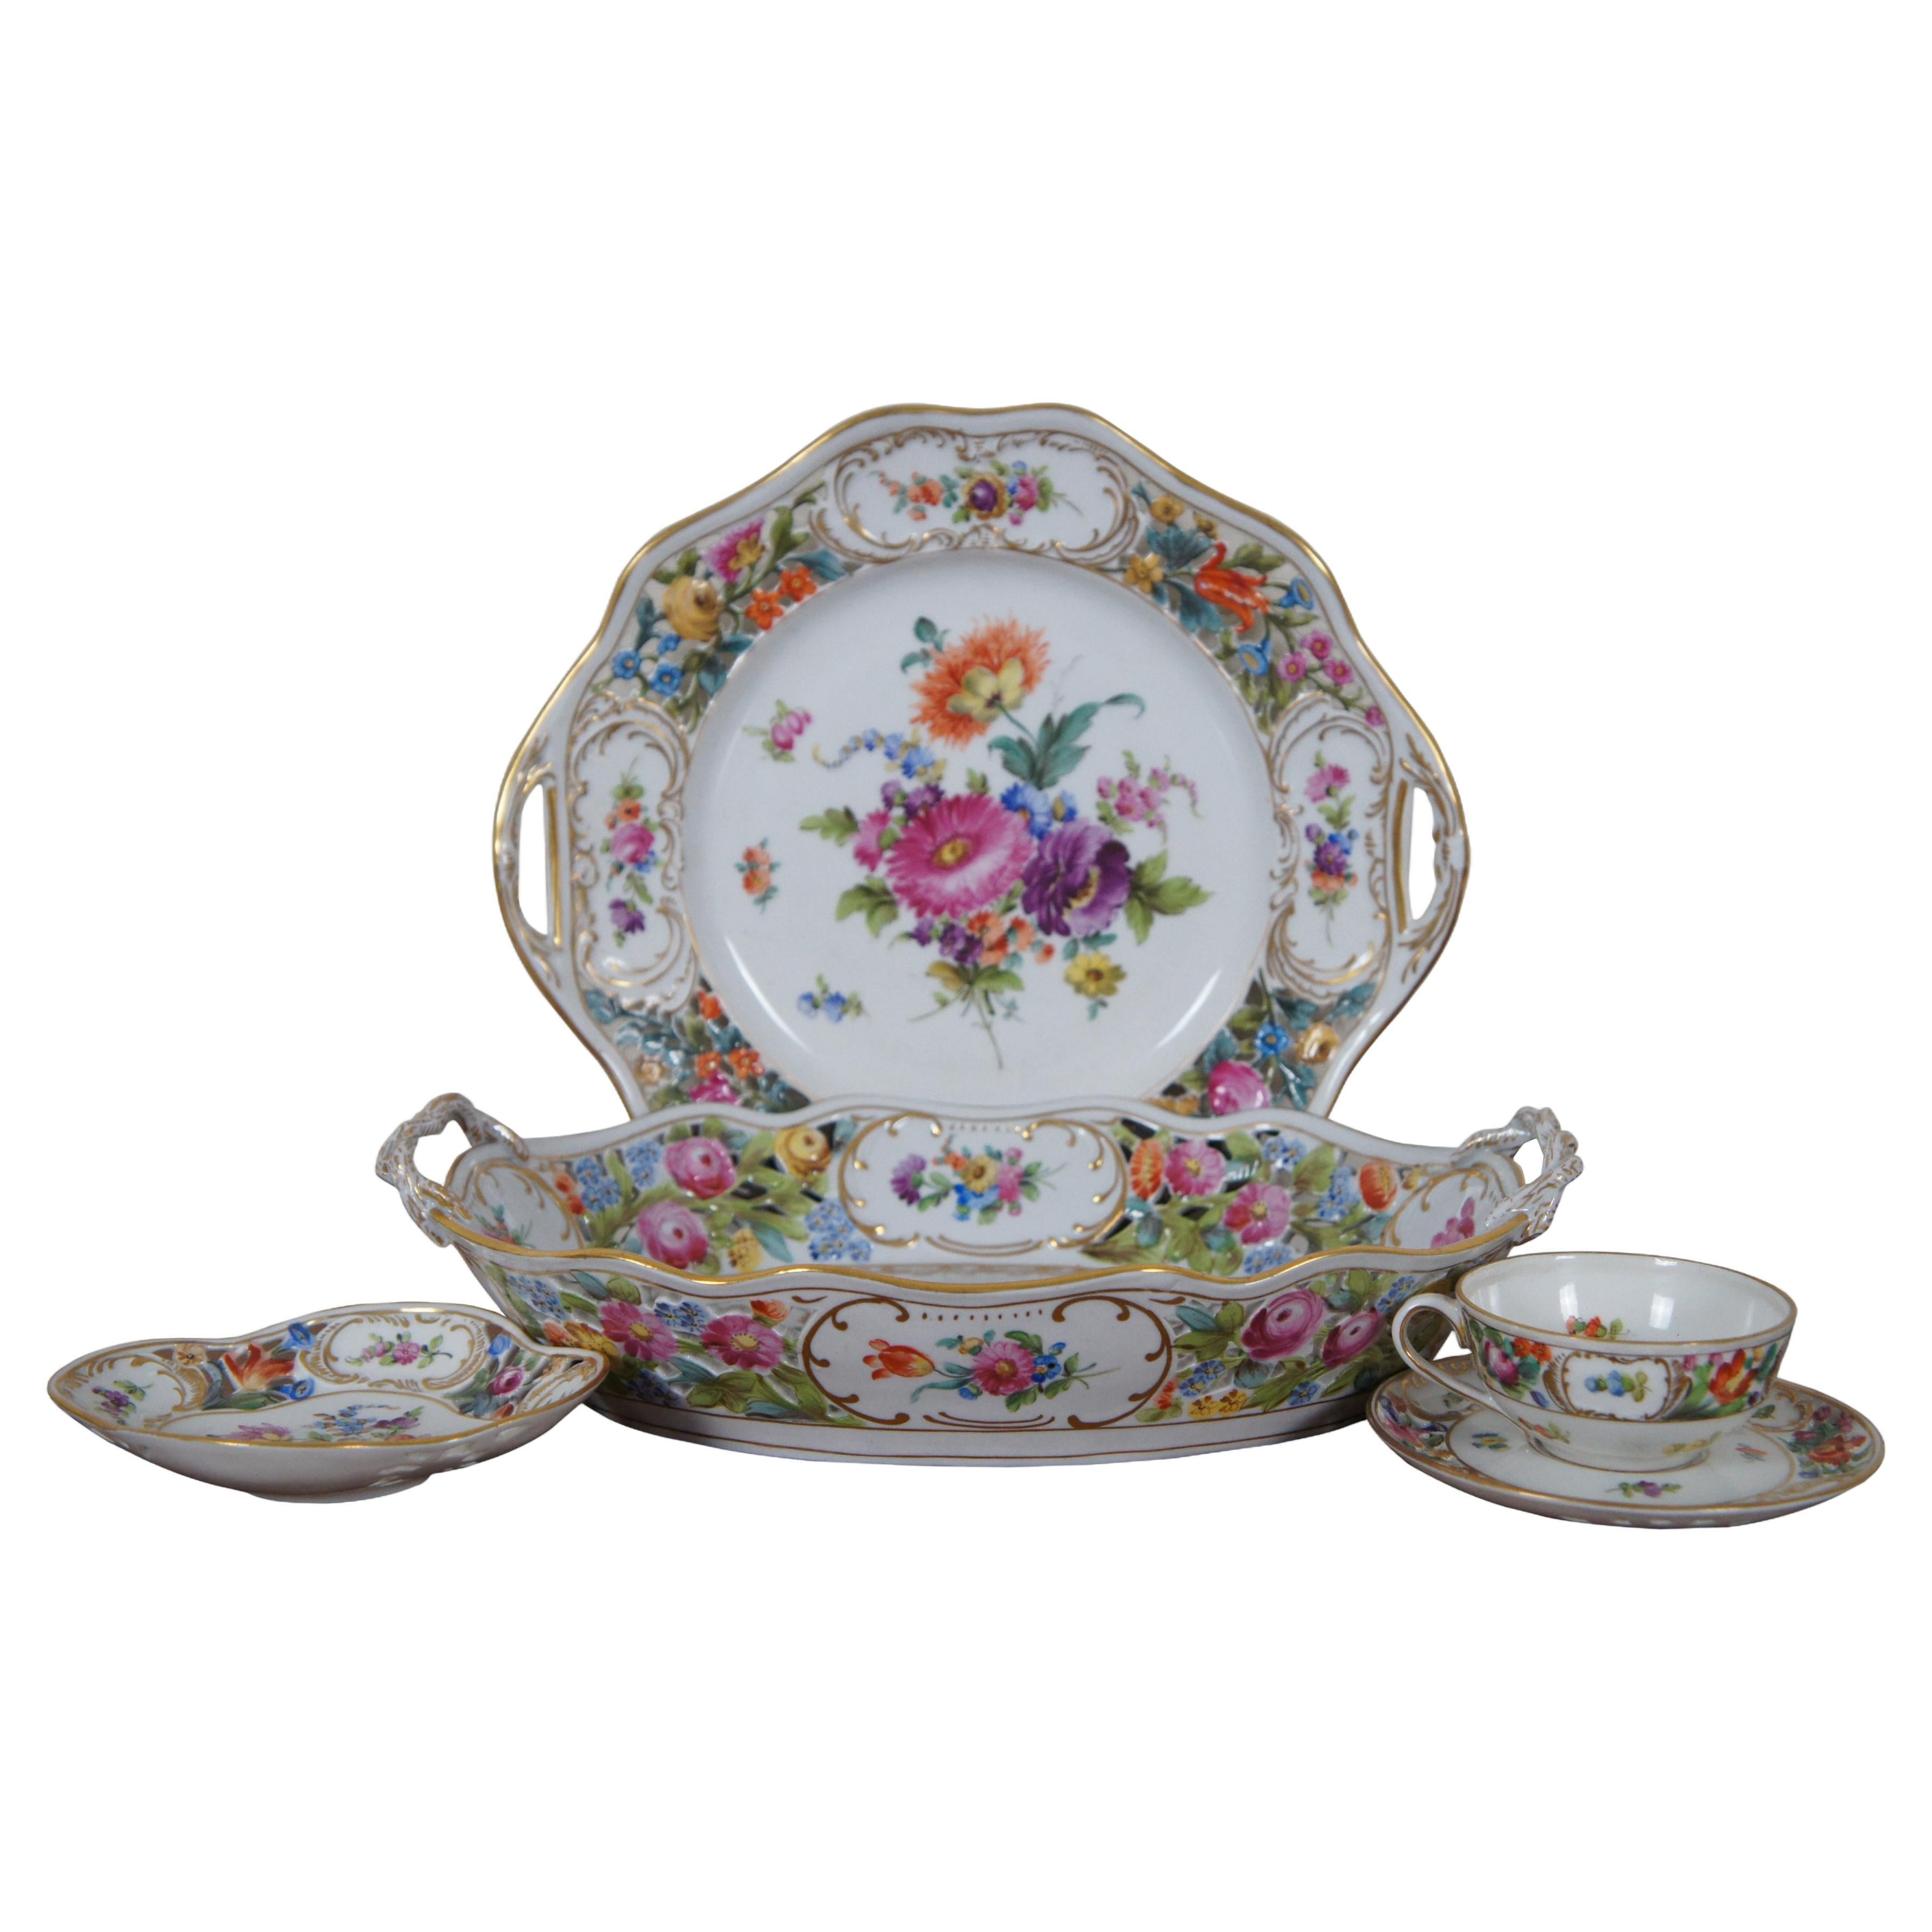 5 Antique German Dresden Reticulated Cake Plate Serving Bowl Tea Cup Saucer For Sale